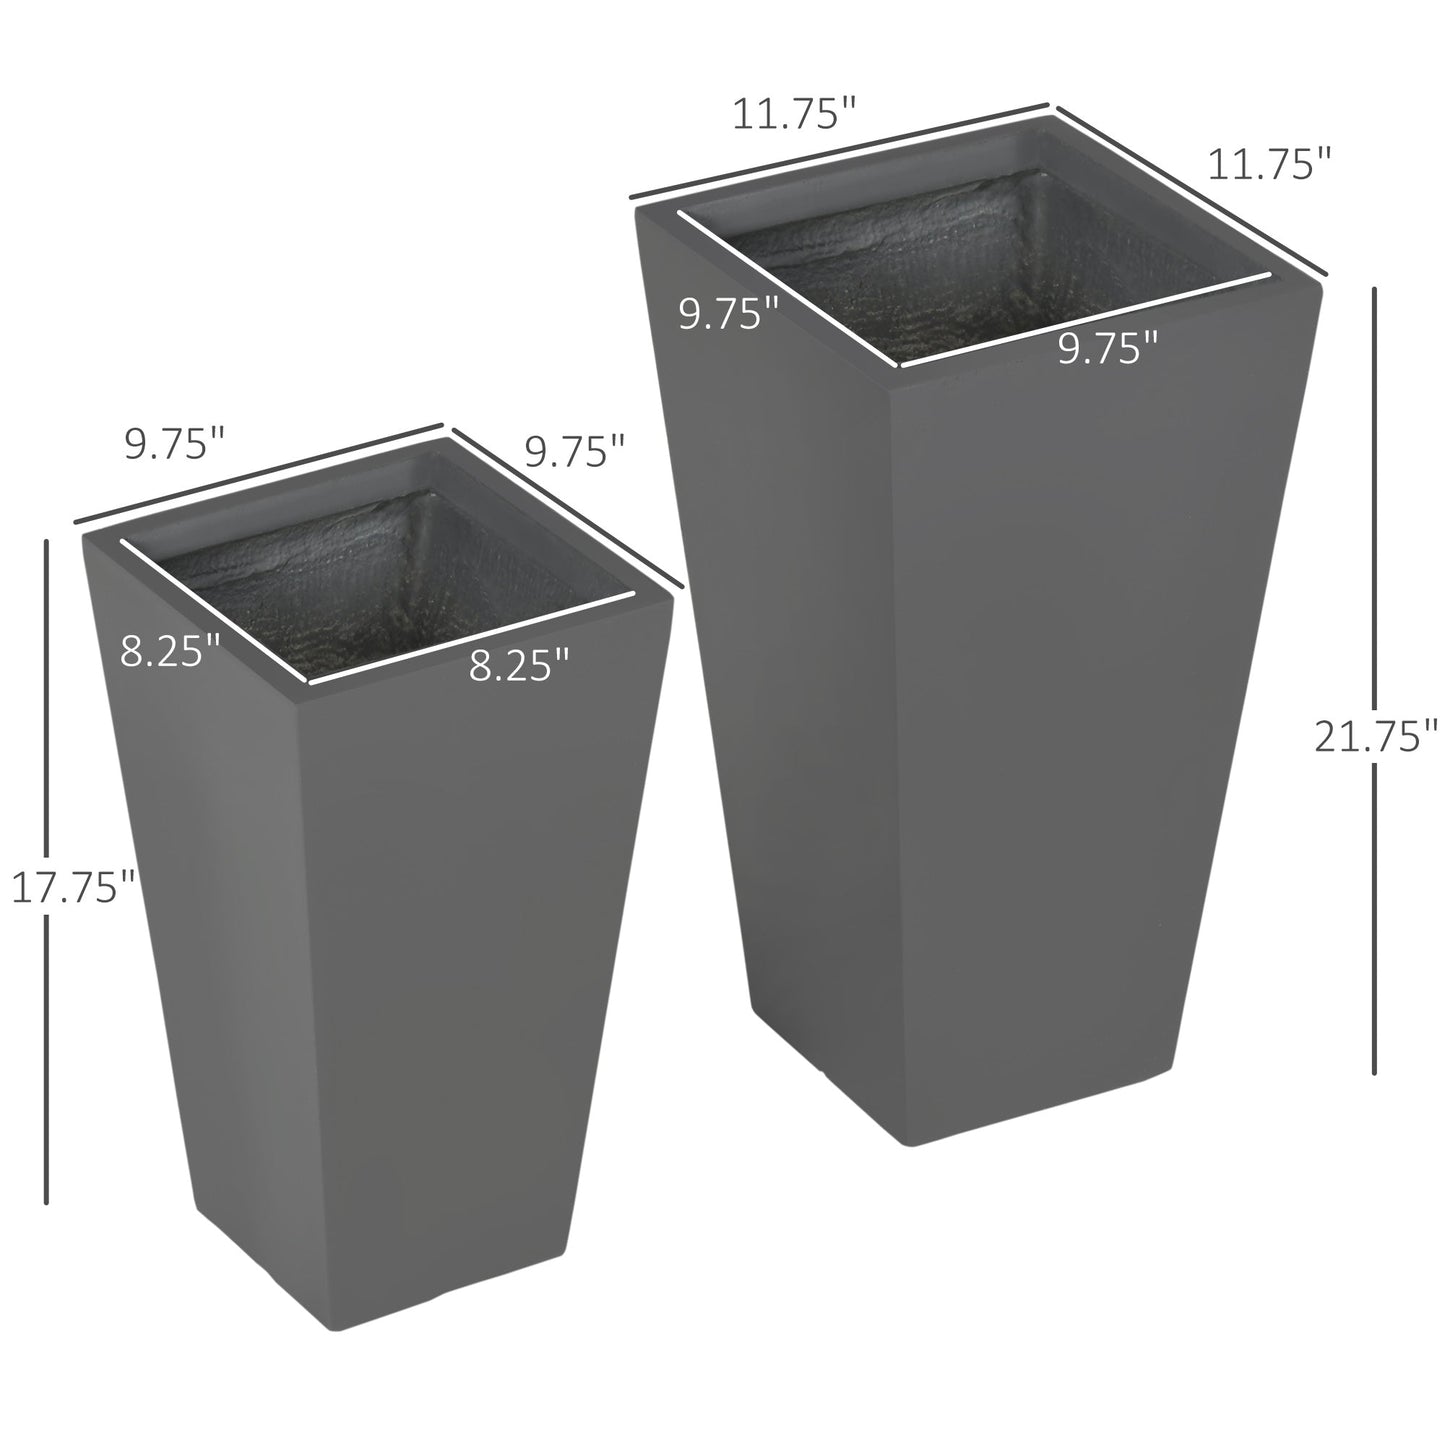 Outdoor and Garden-2-Pack Outdoor Planter Set, MgO Flower Pots with Drainage Holes, Durable & Stackable, for Entryway, Patio, Yard, Garden, Gray - Outdoor Style Company